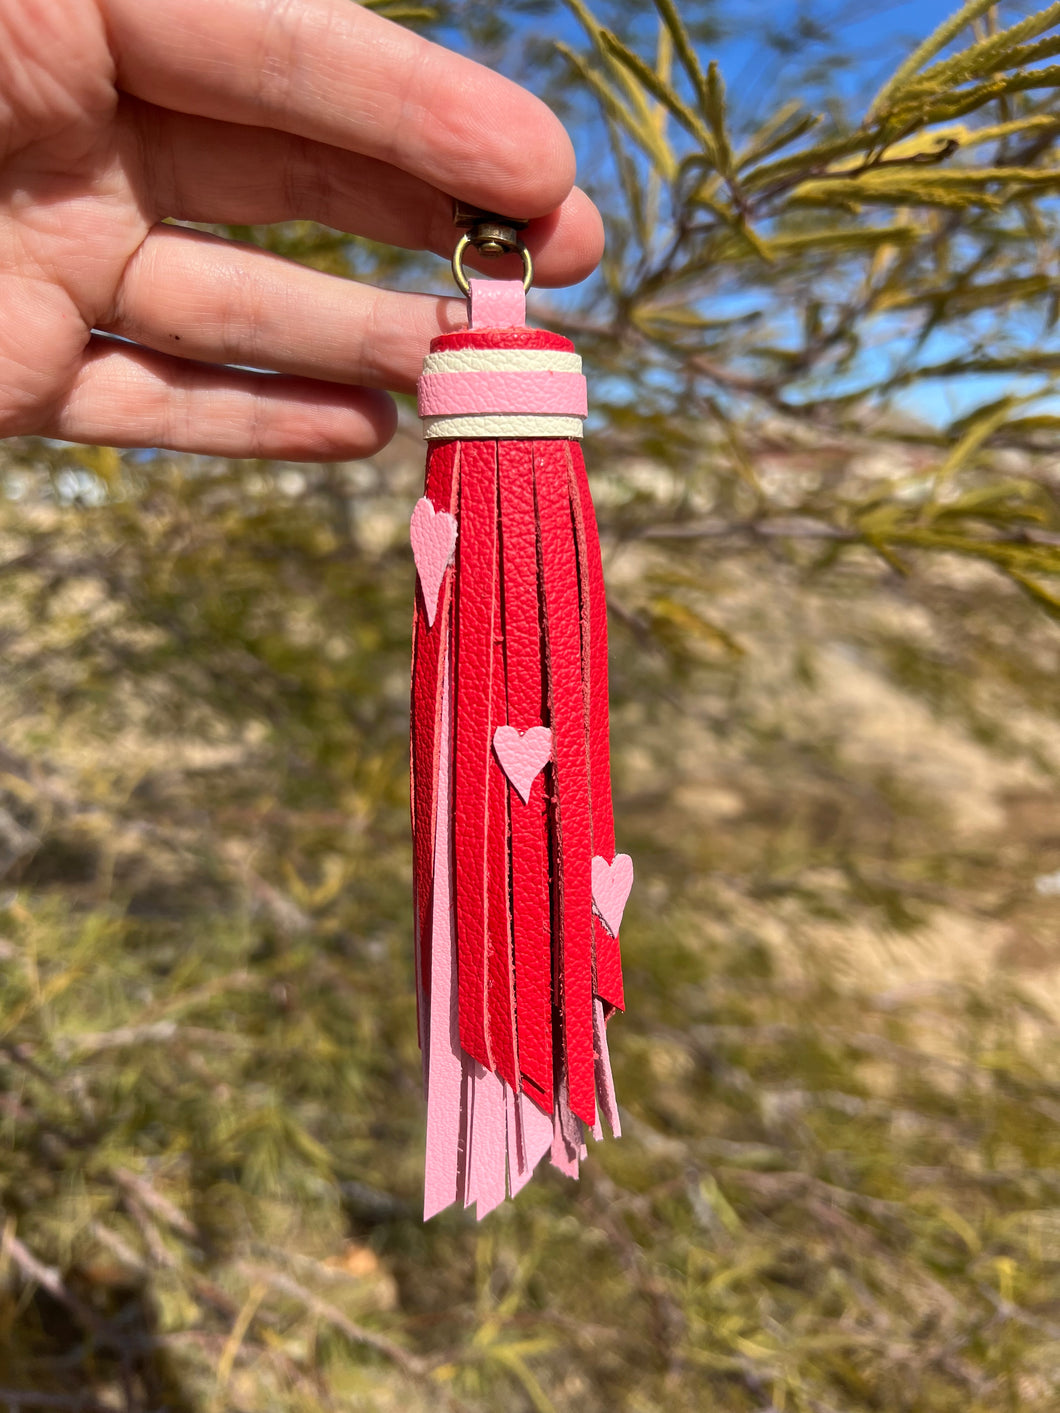 Mini Clip Tassel - Handmade Red and Baby Pink Valentine's Cowhide Leather Tassel with Leather Hearts